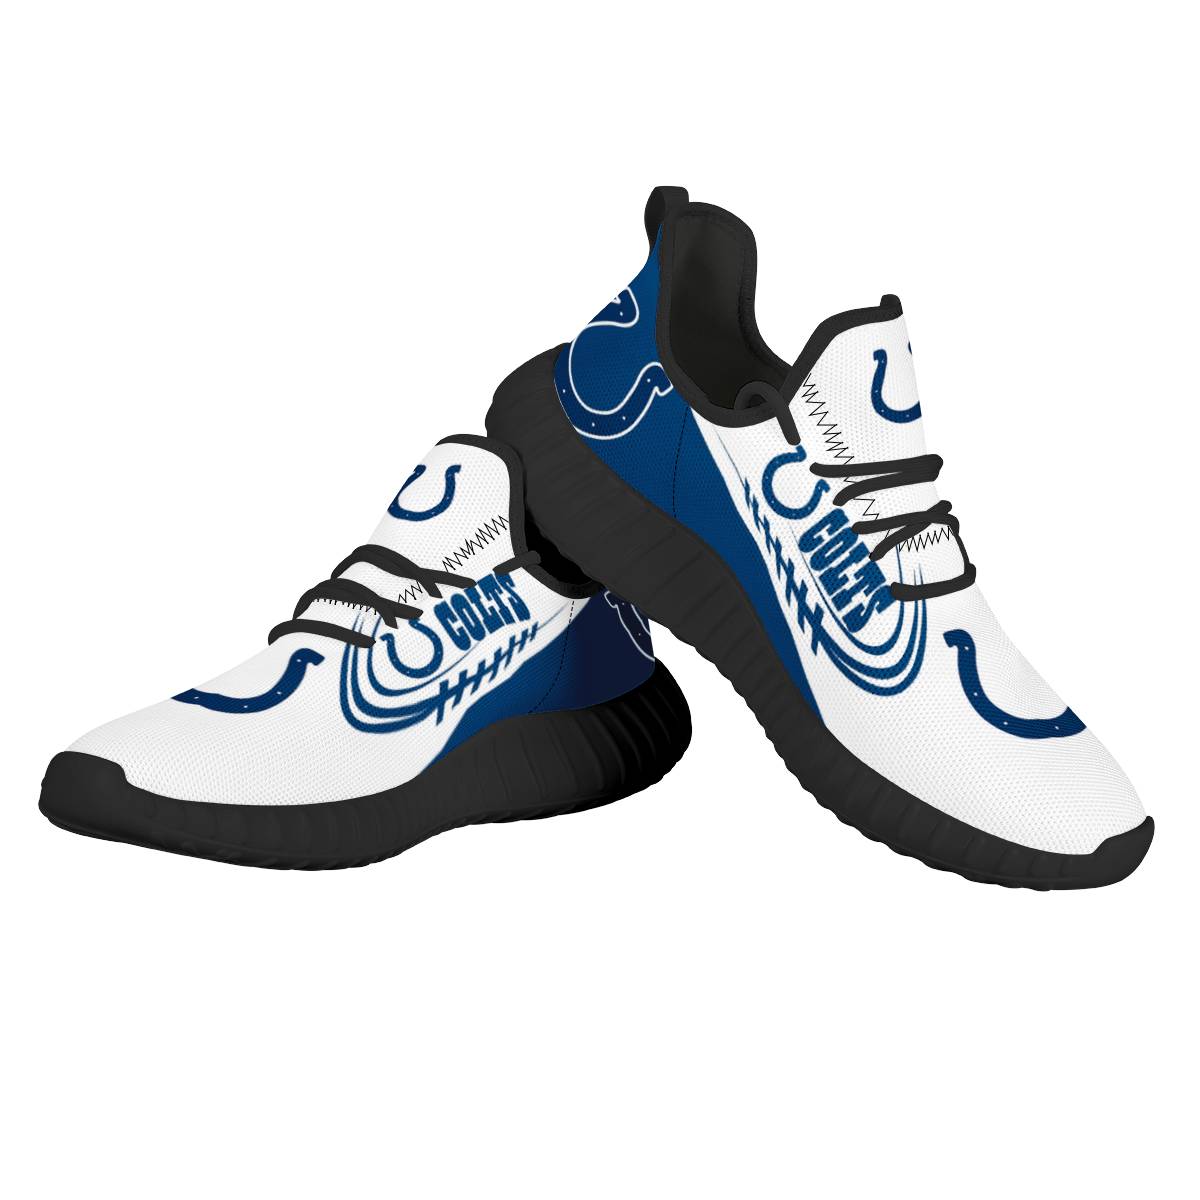 Women's NFL Indianapolis Colts Mesh Knit Sneakers/Shoes 001